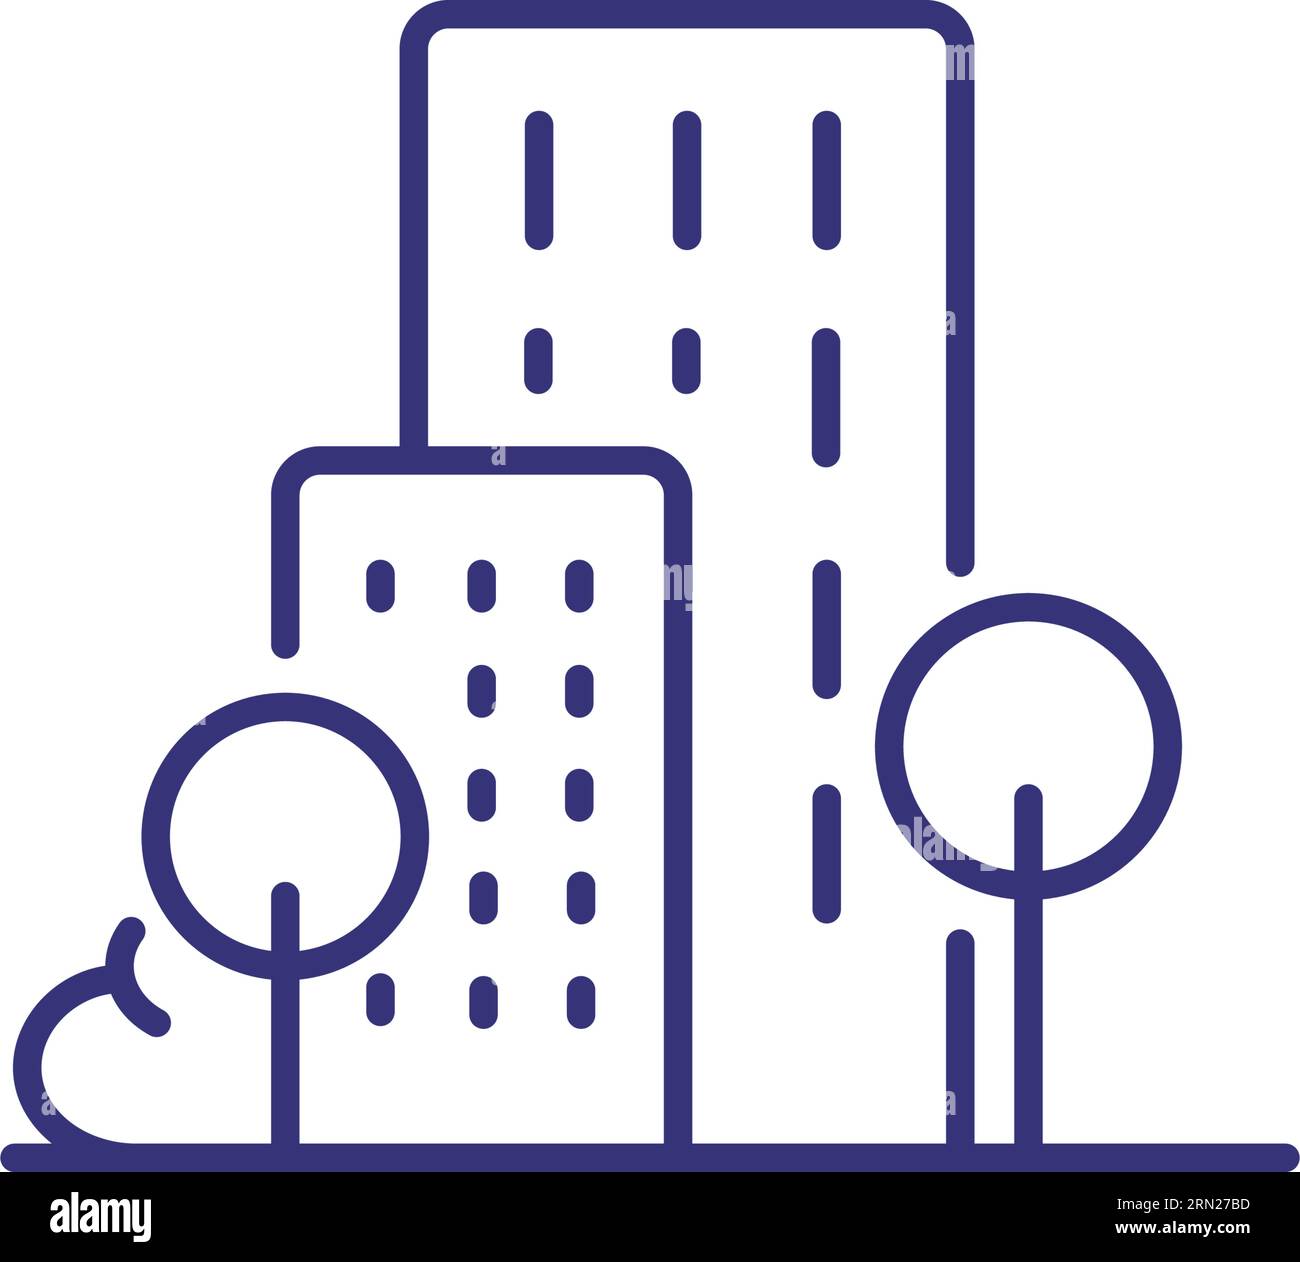 Tall buildings line icon Stock Vector